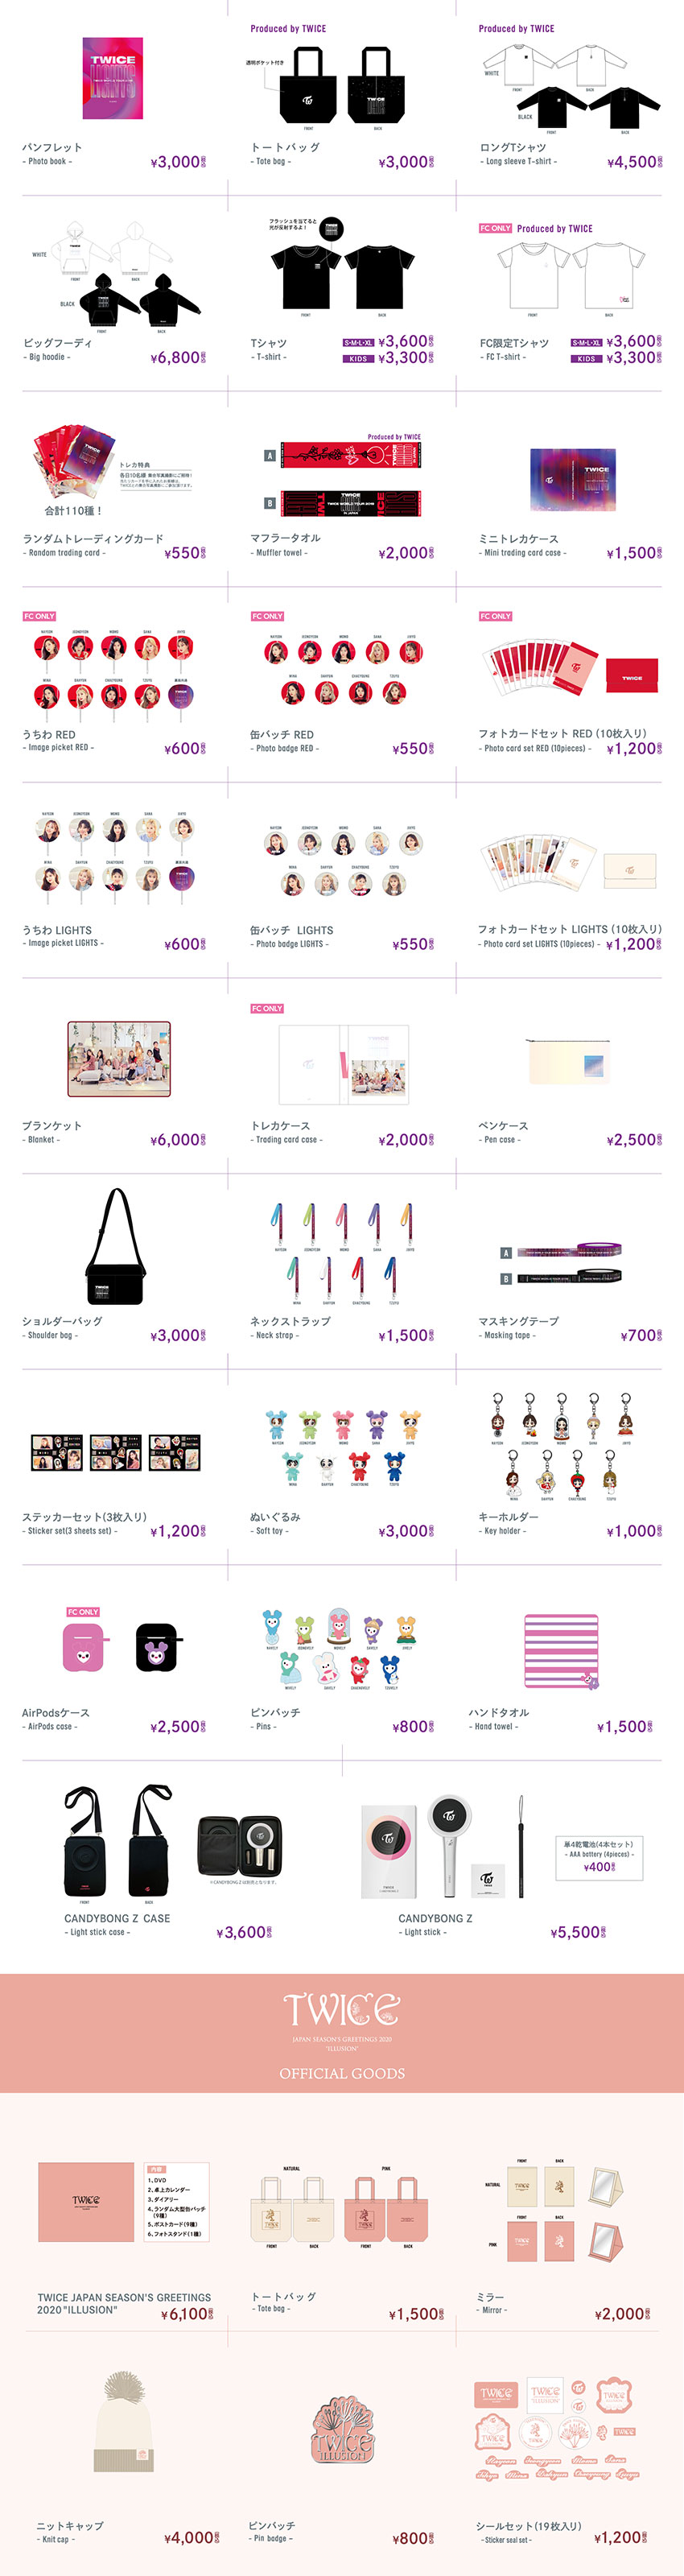 Twice World Tour 19 Twicelights In Japan Twice Official Site